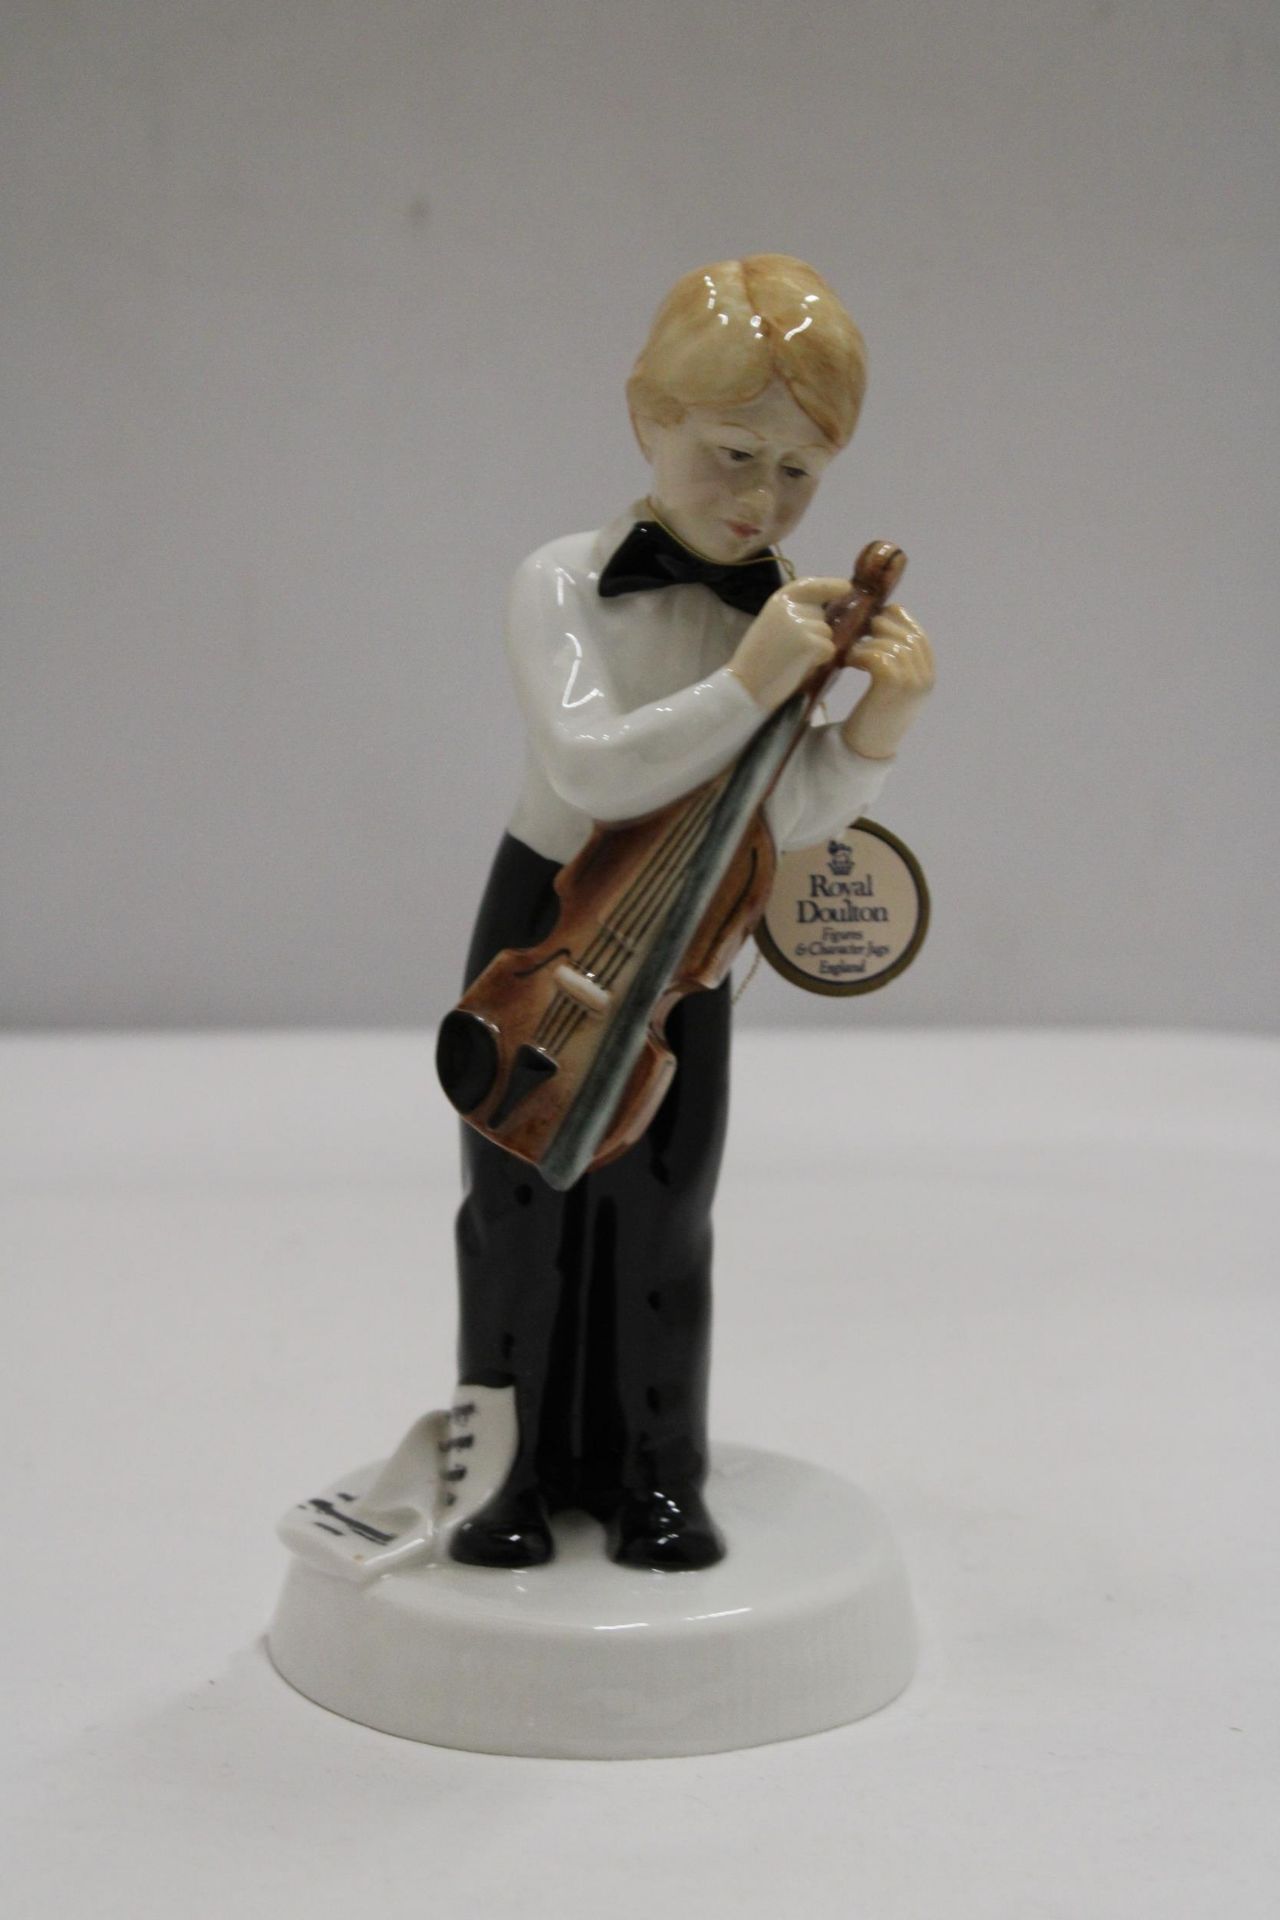 A ROYAL DOULTON CHILDHOOD DAYS "I'M NEARLY READY" FIGURE HN 2976 - Image 2 of 6